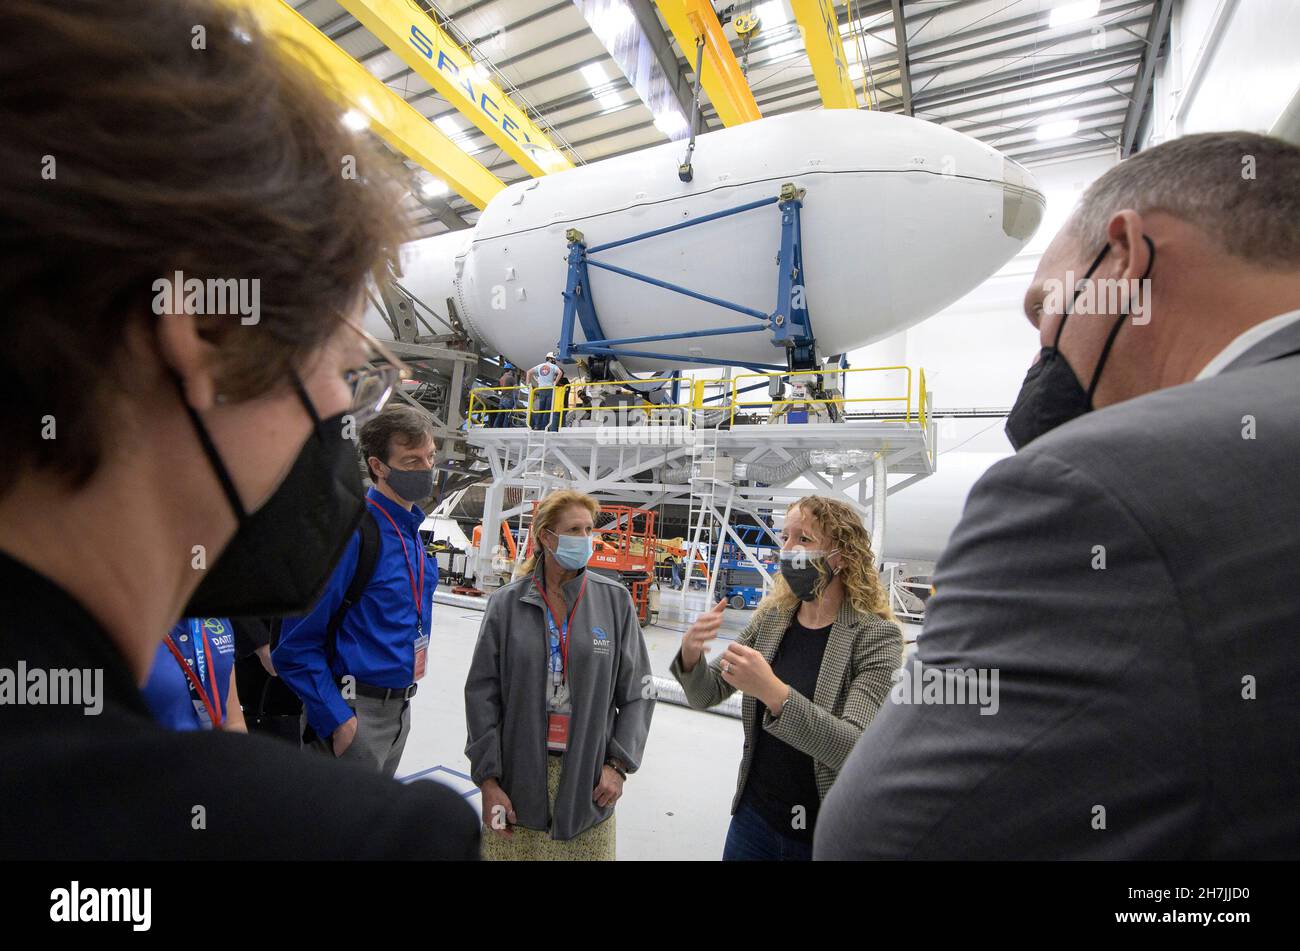 California.US, Nov. 23, 2021, NASA Associate Administrator for the Science Mission Directorate Thomas Zurbuchen, right, and other NASA leadership listen as Julianna Scheiman, director for civil satellite missions, SpaceX, center, gives a tour of the hanger where the Falcon 9 rocket and DART spacecraft are being readied for launch, Monday, Nov. 22, 2021, at Vandenberg Space Force Base in California. DART is the worlds first full-scale planetary defense test, demonstrating one method of asteroid deflection technology. The mission was built and is managed by the Johns Hopkins APL for NASAs Plan Stock Photo